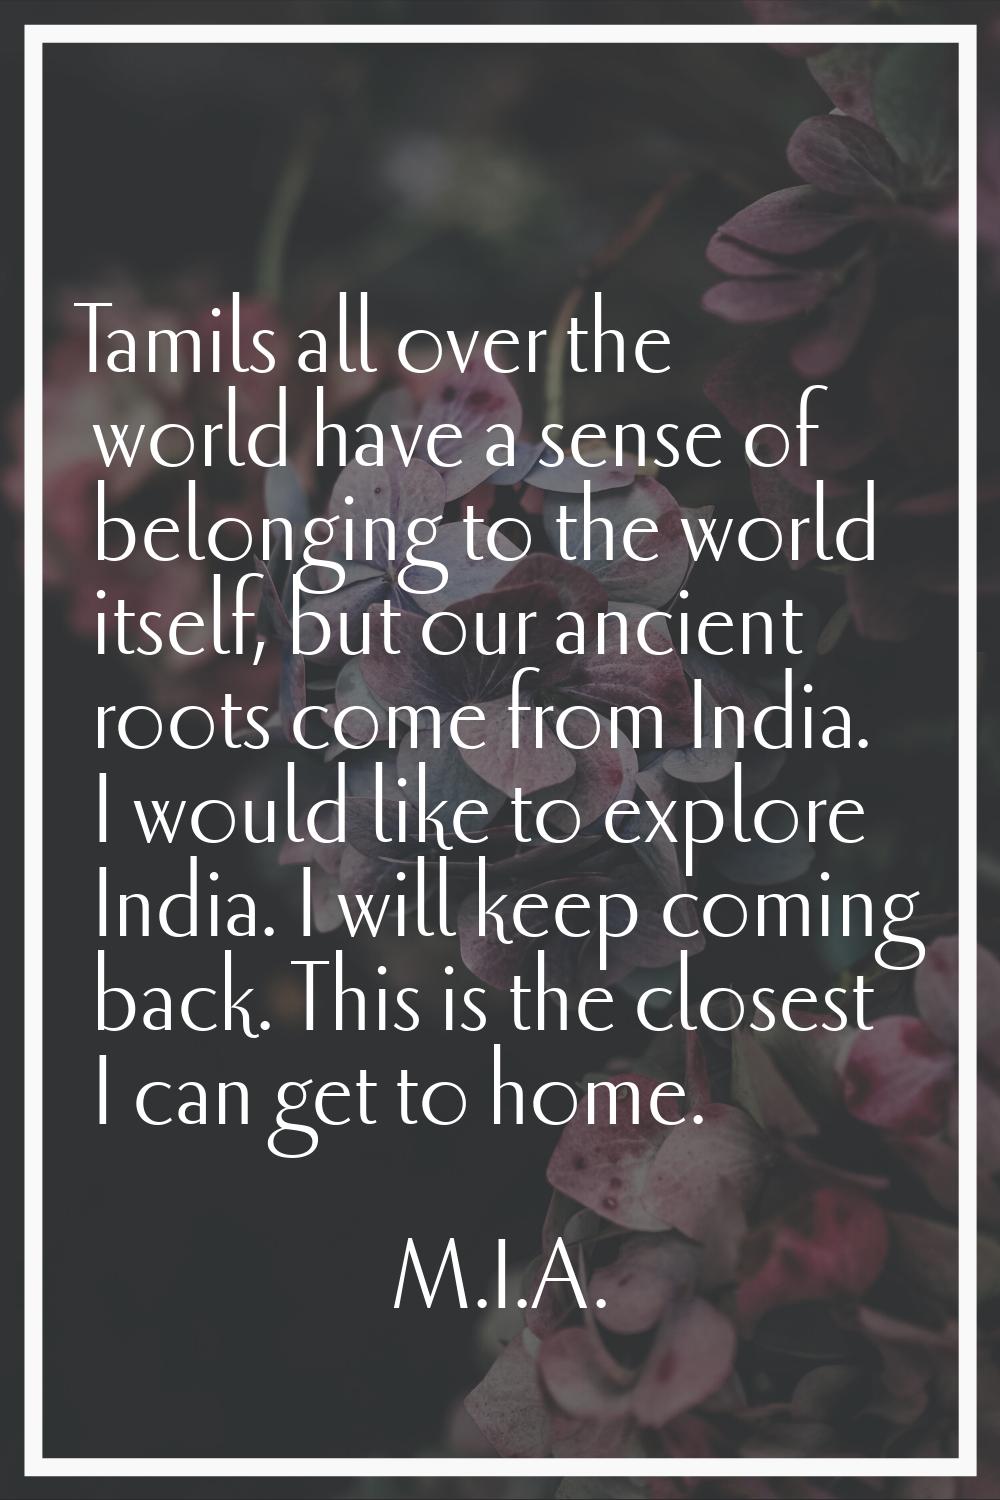 Tamils all over the world have a sense of belonging to the world itself, but our ancient roots come